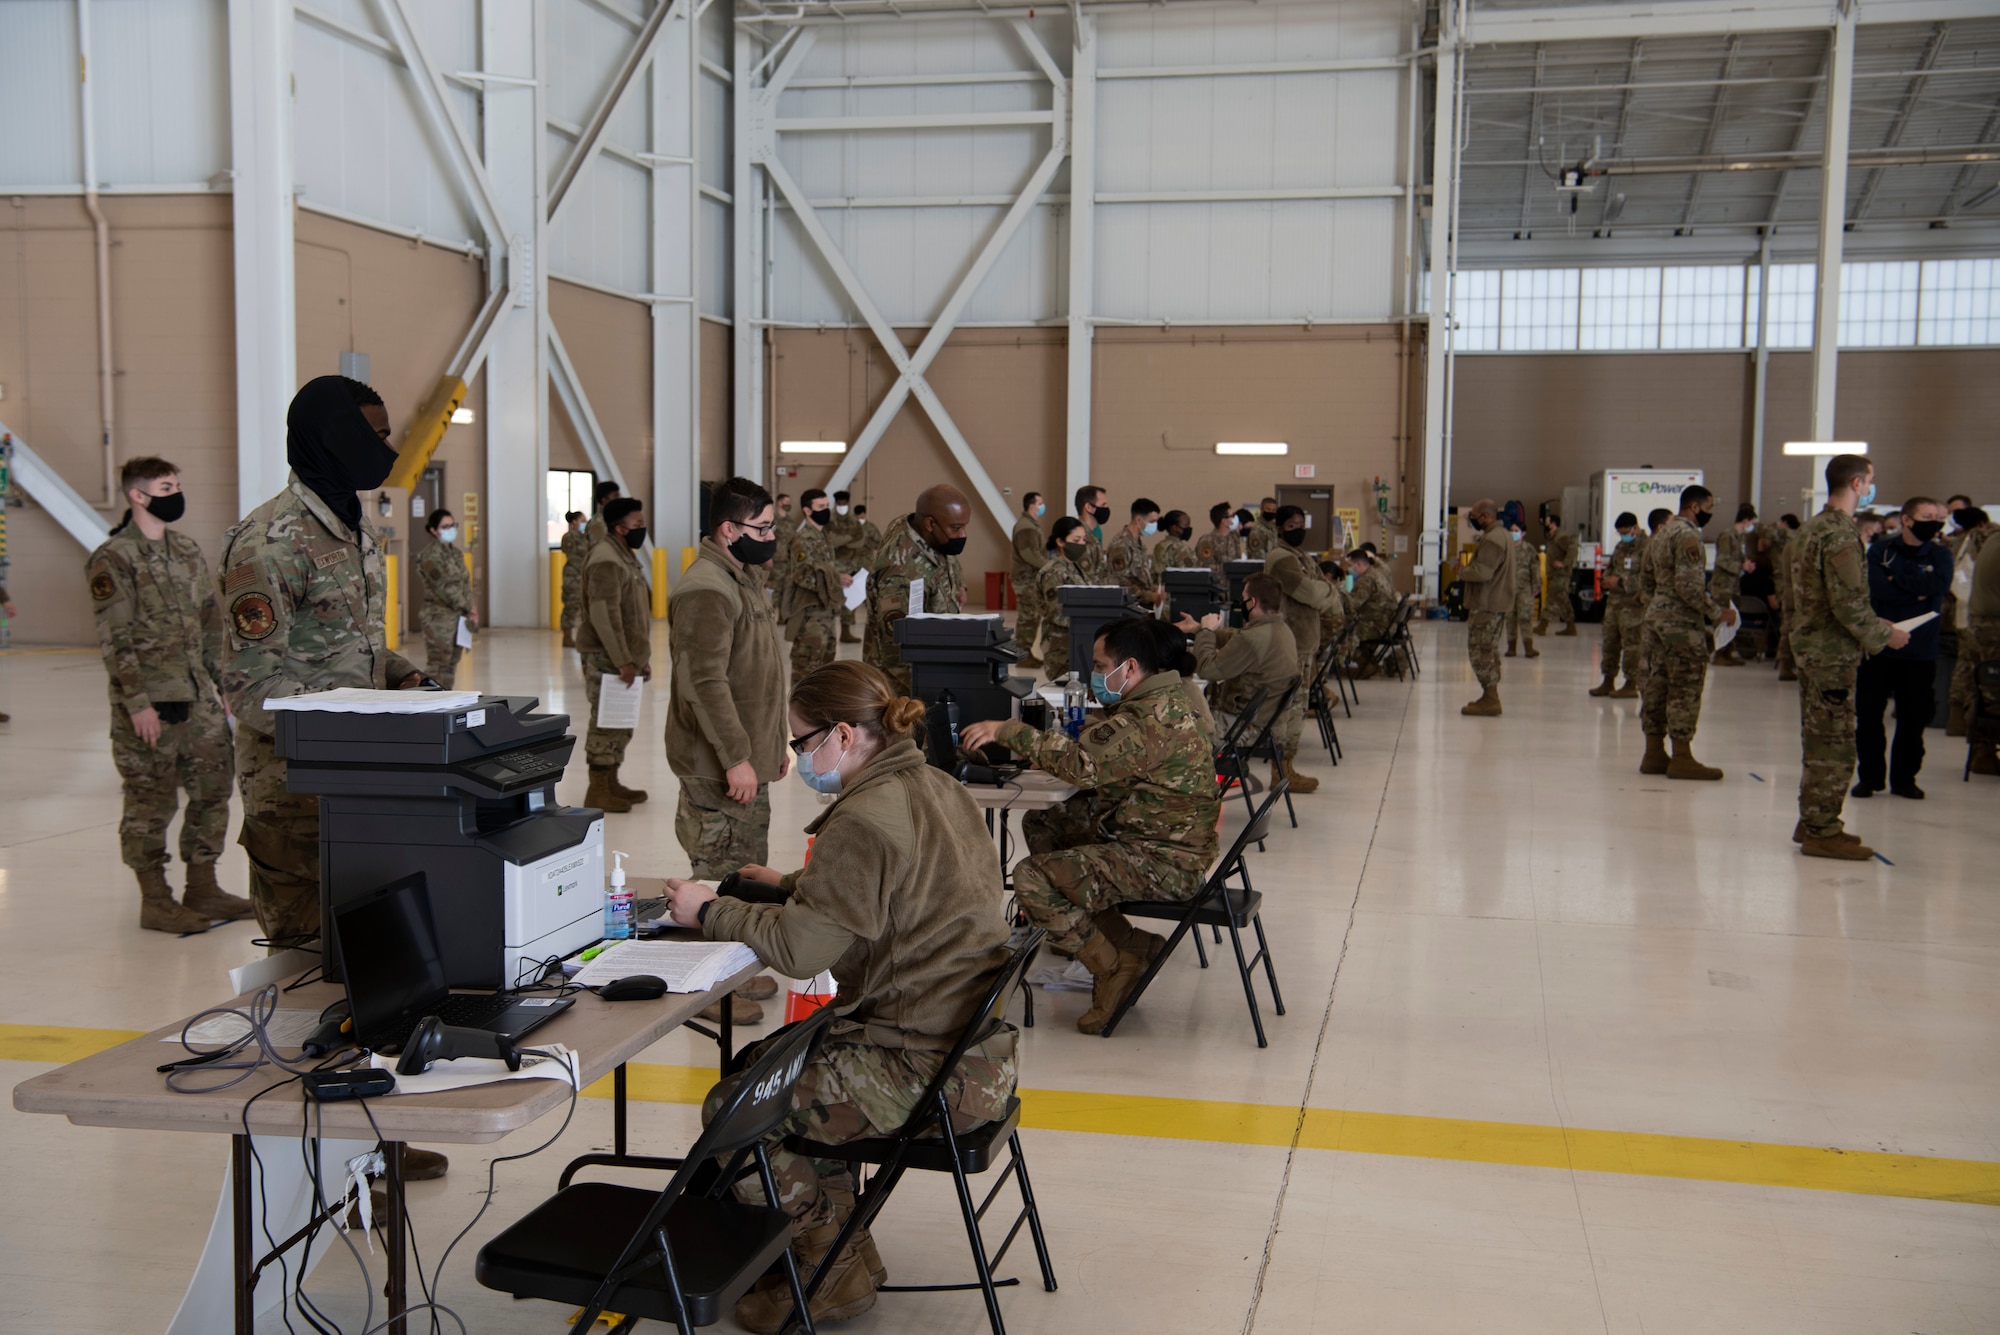 U.S. Airmen from the 60th Medical Group check in military personnel at the influenza vaccine point of distribution in a hangar Jan. 14, 2021, at Travis Air Force Base, California. The POD is an organized way of efficiently distributing a vaccine to a large amount of people and preparing medical personnel for future large-scale distributions such as the COVID-19 vaccine. (U.S. Air Force photo by Airman 1st Class Alexander Merchak)